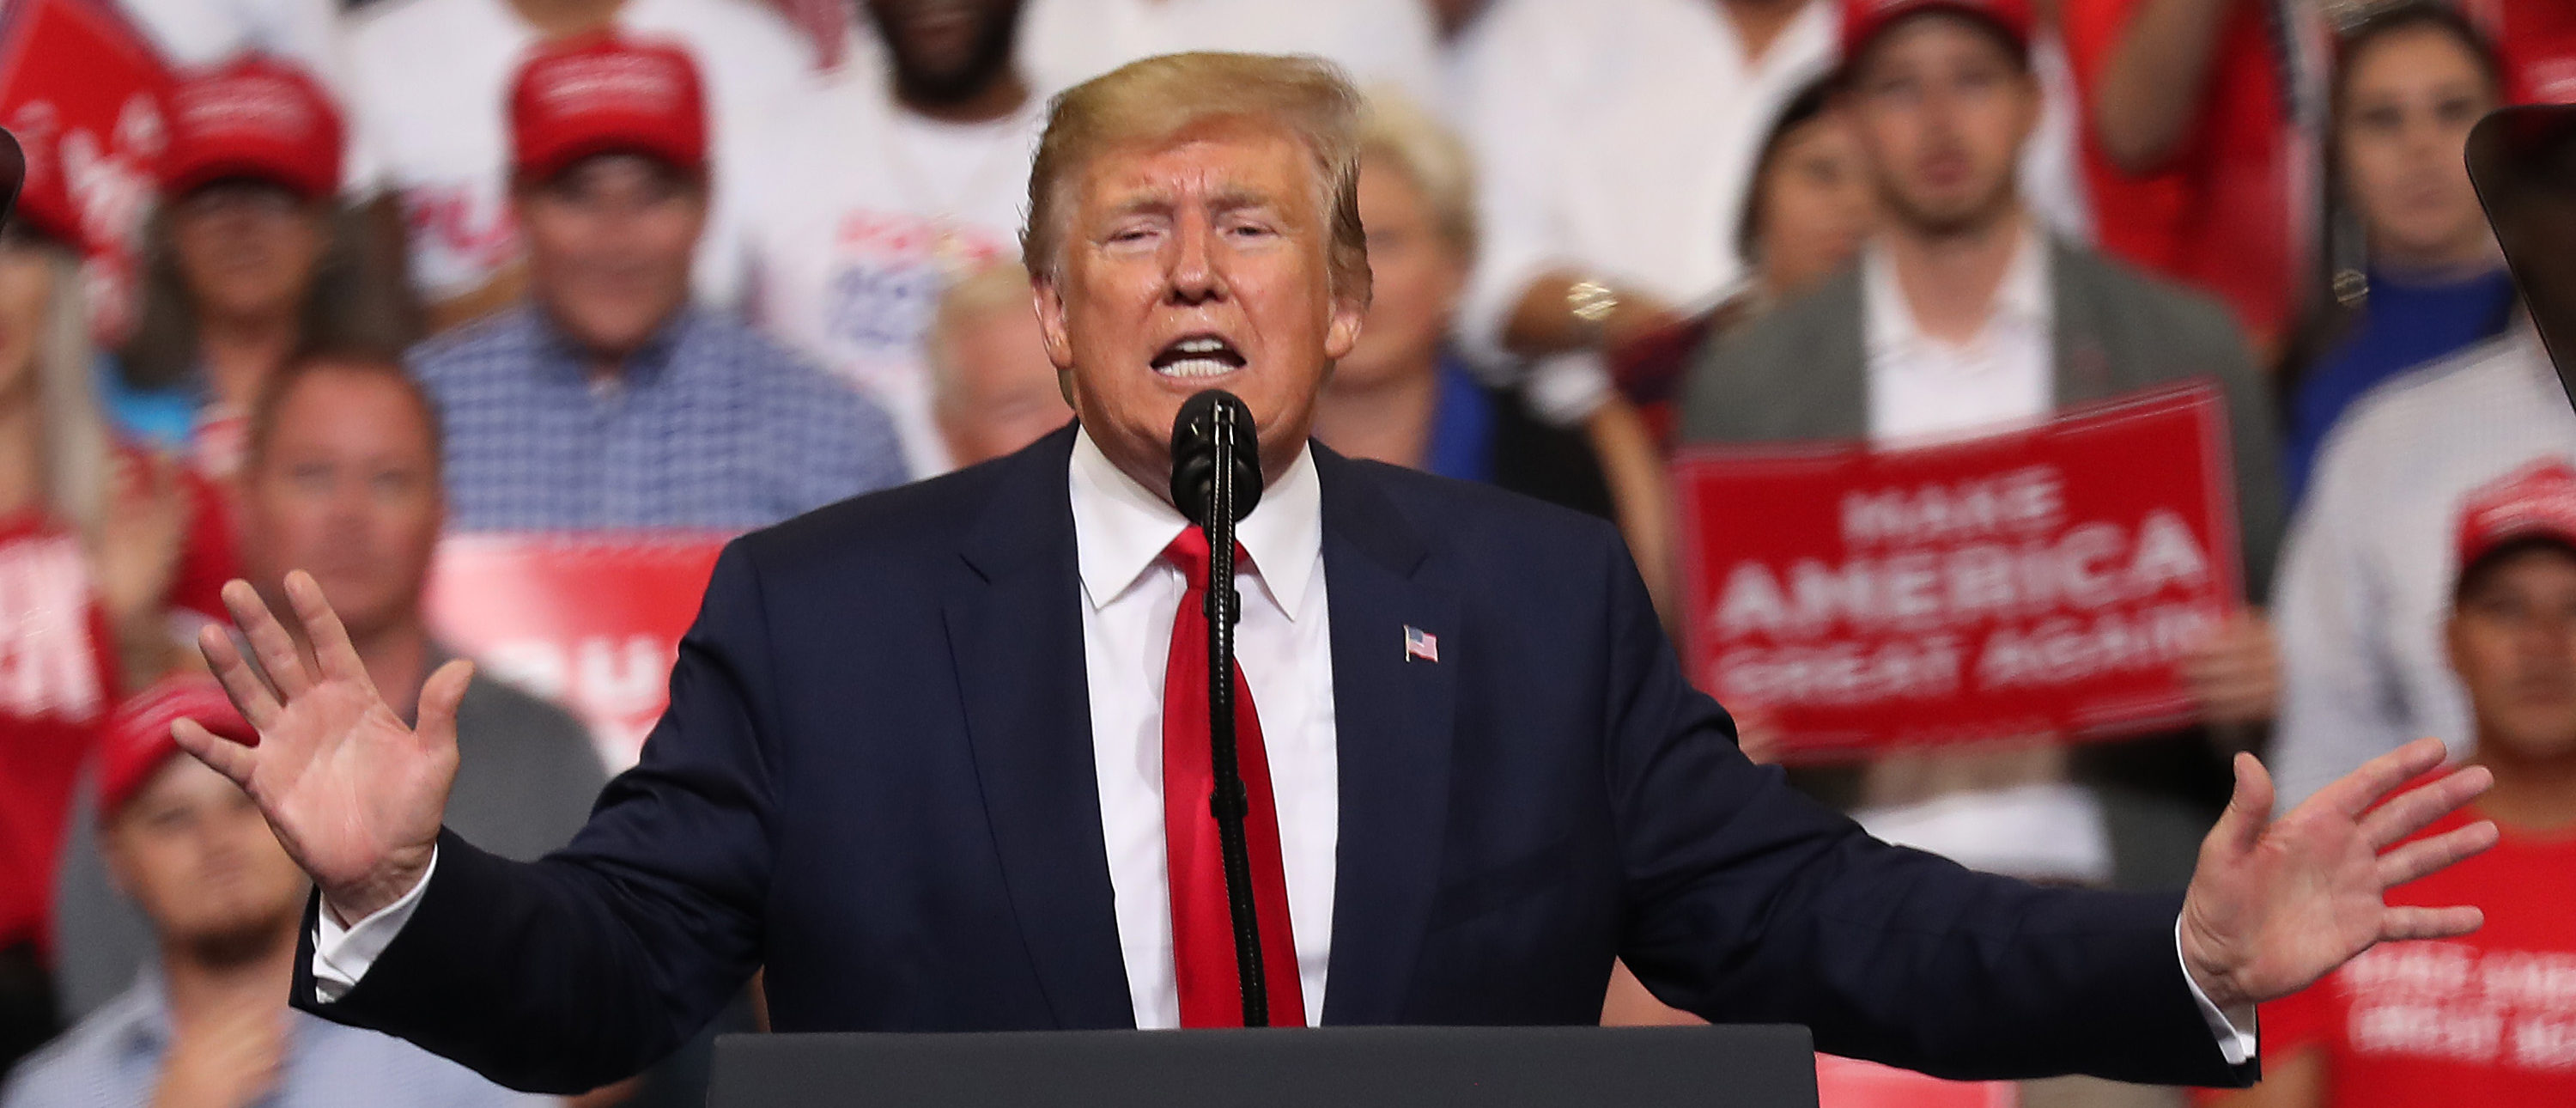 ORLANDO, FLORIDA - JUNE 18: U.S. President Donald Trump speaks during a rally where he announced his candidacy for a second presidential term at the Amway Center on June 18, 2019 in Orlando, Florida. President Trump is set to run against a wide open Democratic field of candidates. (Photo by Joe Raedle/Getty Images)